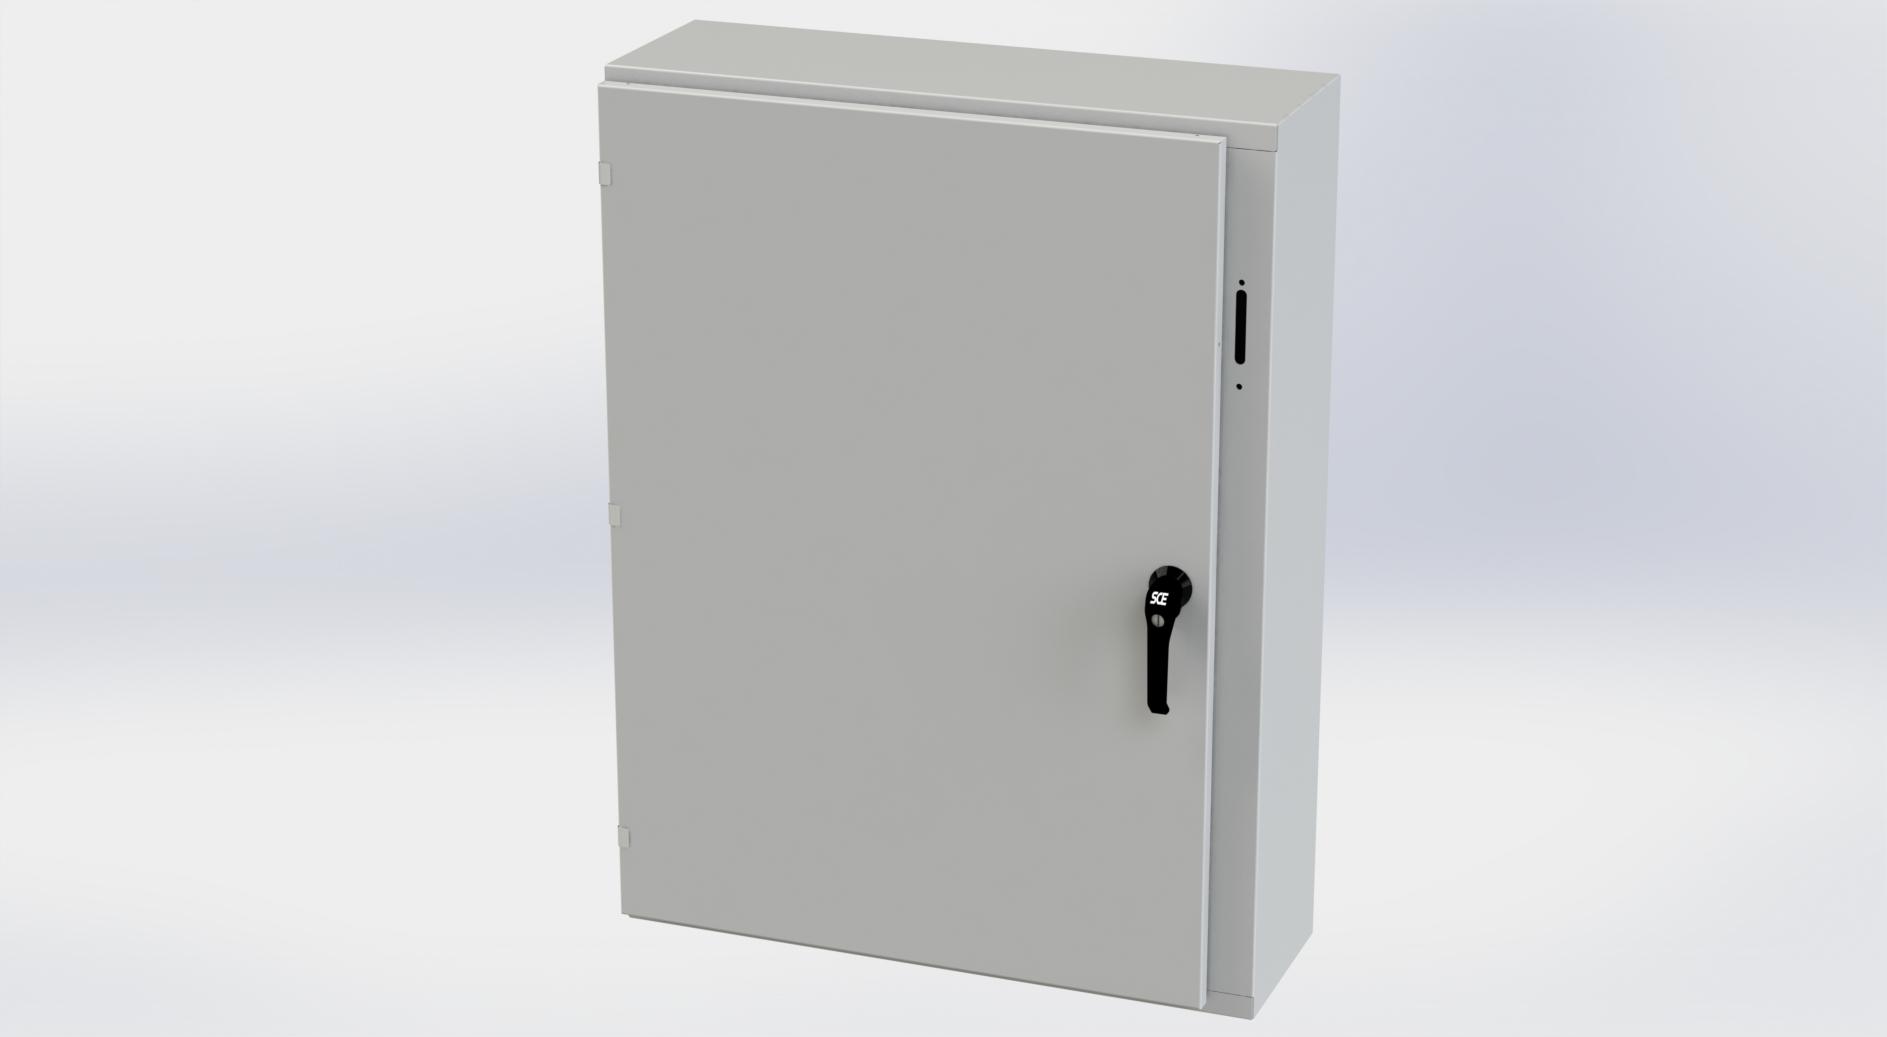 Saginaw Control SCE-42XEL3110LPLG XEL LP Enclosure, Height:42.00", Width:31.38", Depth:10.00", RAL 7035 gray powder coating inside and out. Optional sub-panels are powder coated white.